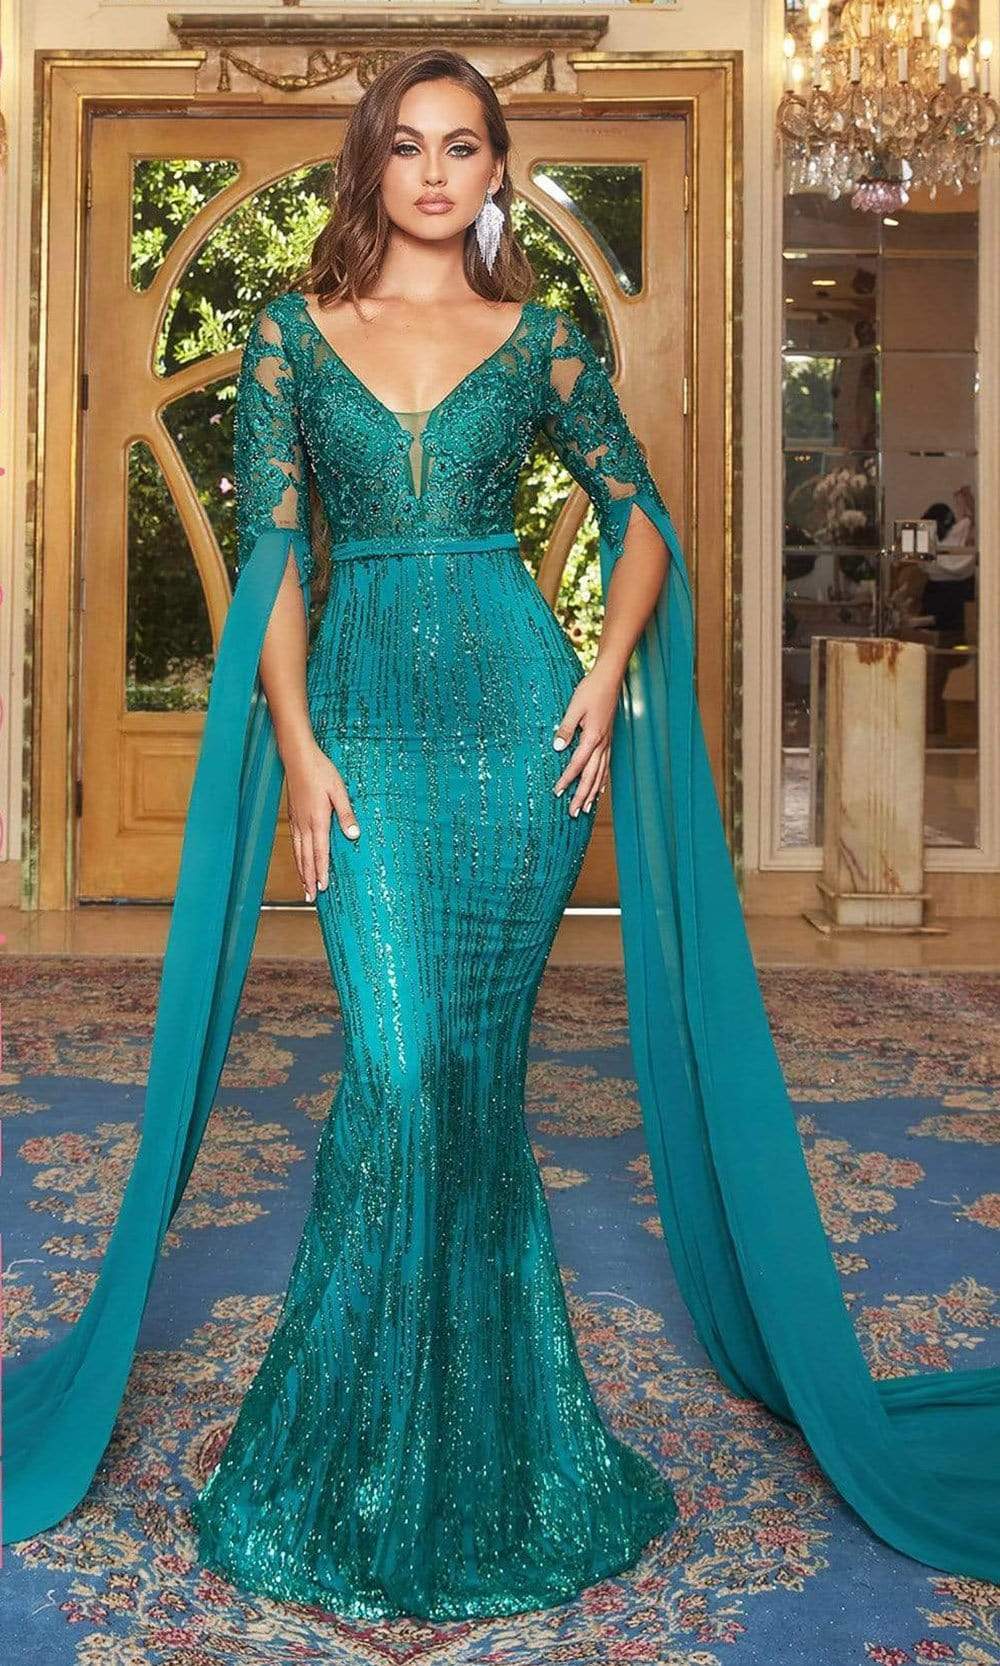 Portia and Scarlett - PS22168 Bat Sleeved Embellished Mermaid Gown Prom Dresses 0 / Emerald